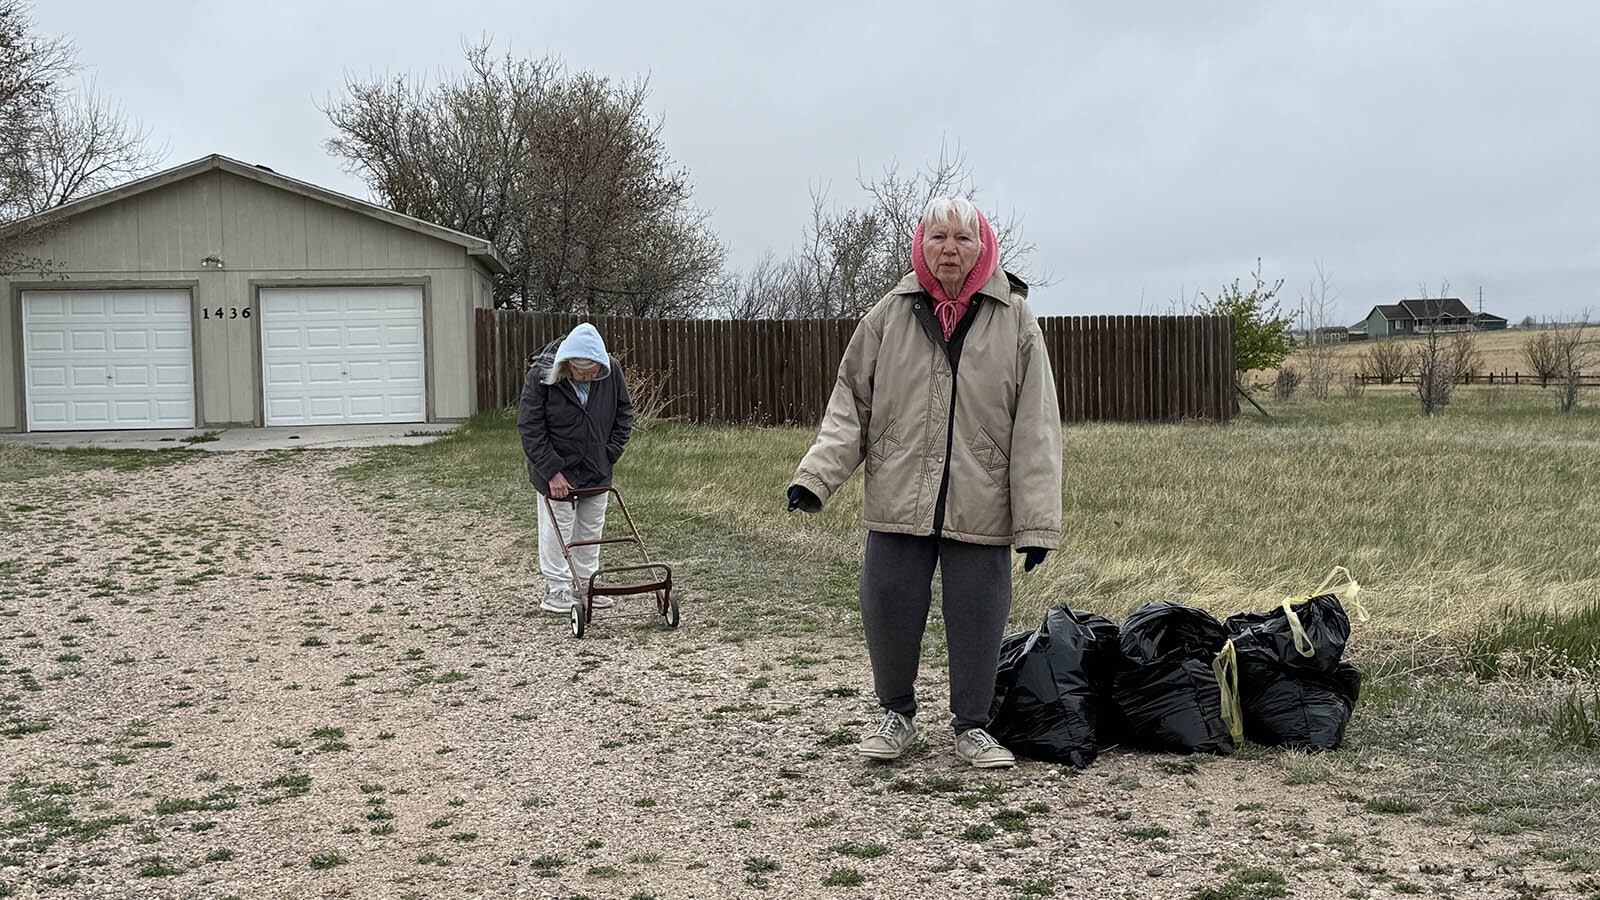 Two elderly ladies who were taking their trash to the curb of their home at 1436 Dayshia Drive, are upset about the noisy earthmoving equipment used to plow up the huge grasslands behind their neighborhood.  Social media giant Meta, which operates social networking site Facebook, has plans to build a massive enterprise data center behind their house.